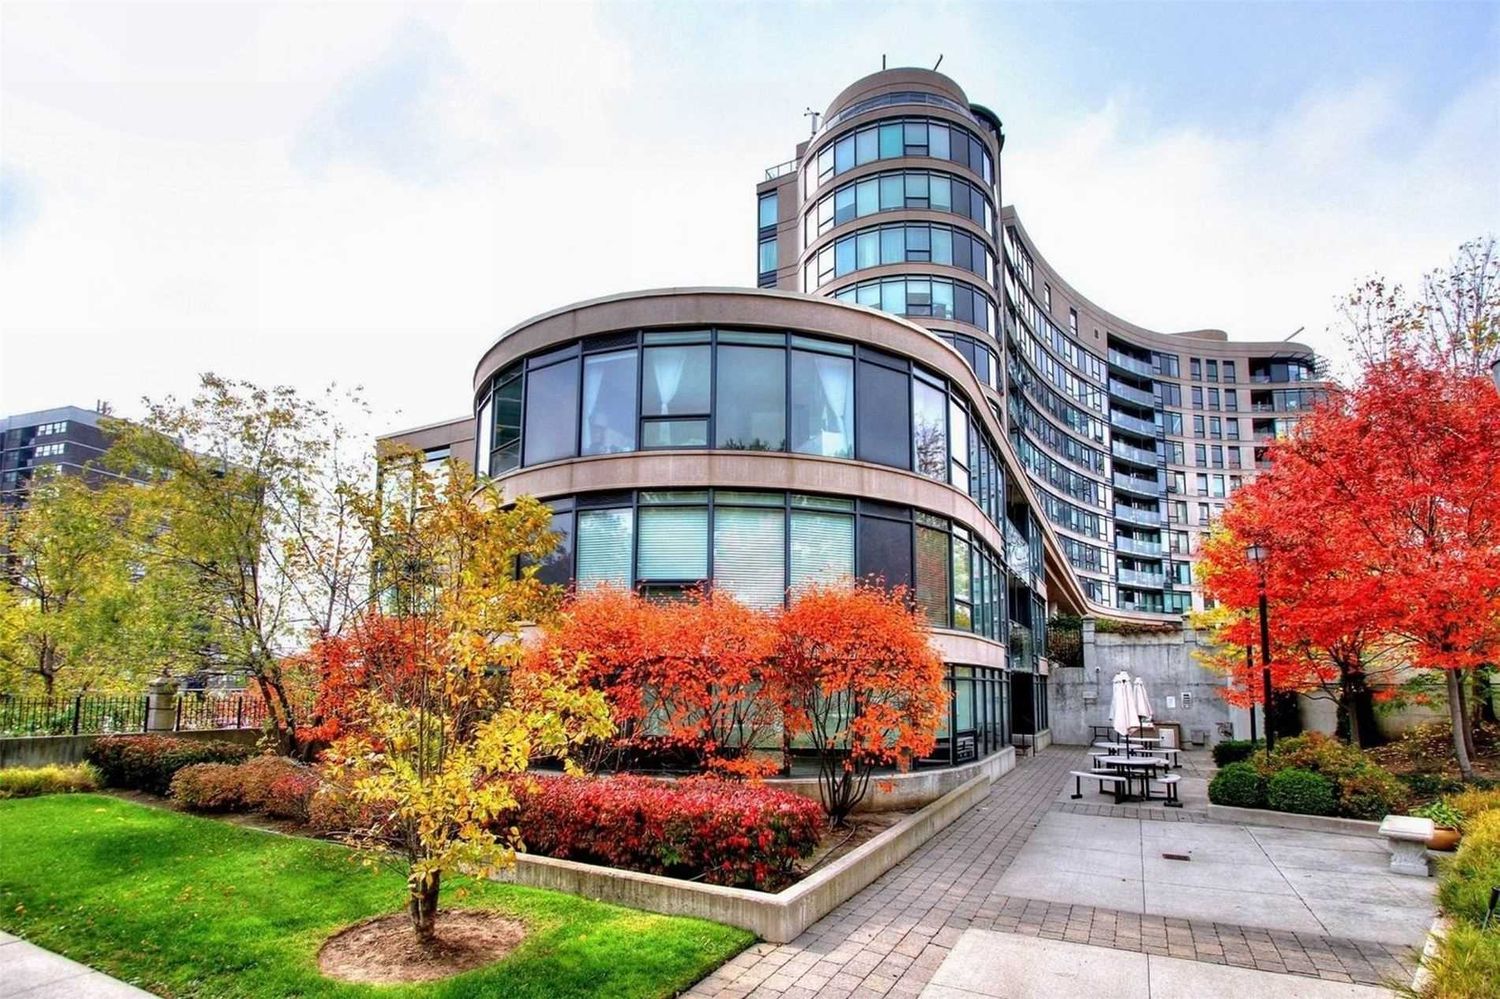 18 Valley Woods Road. Bellair Gardens Condos is located in  North York, Toronto - image #2 of 3